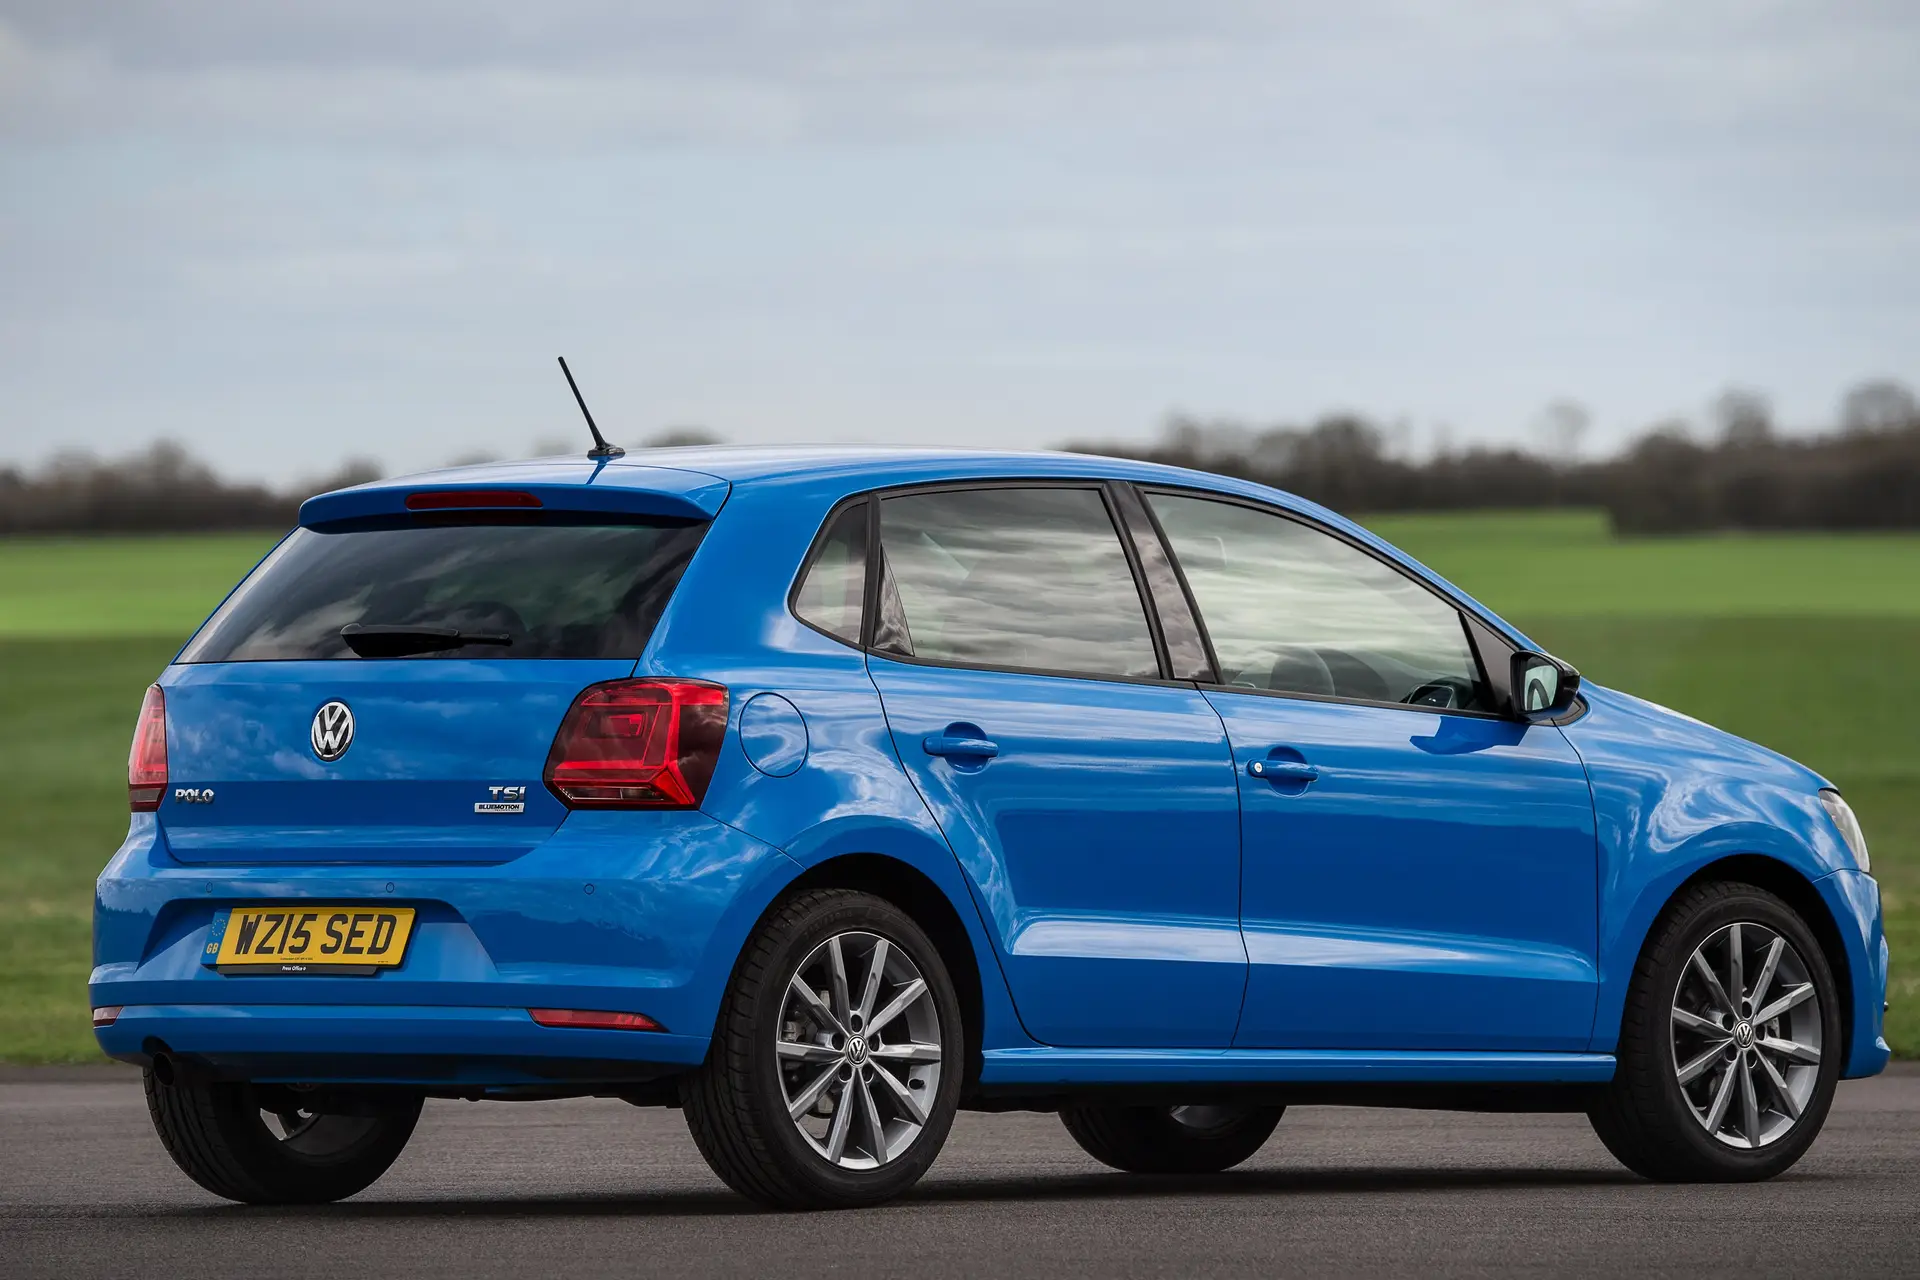  Volkswagen Polo (2009-2017) Review: exterior rear three quarter photo of the Volkswagen Polo 